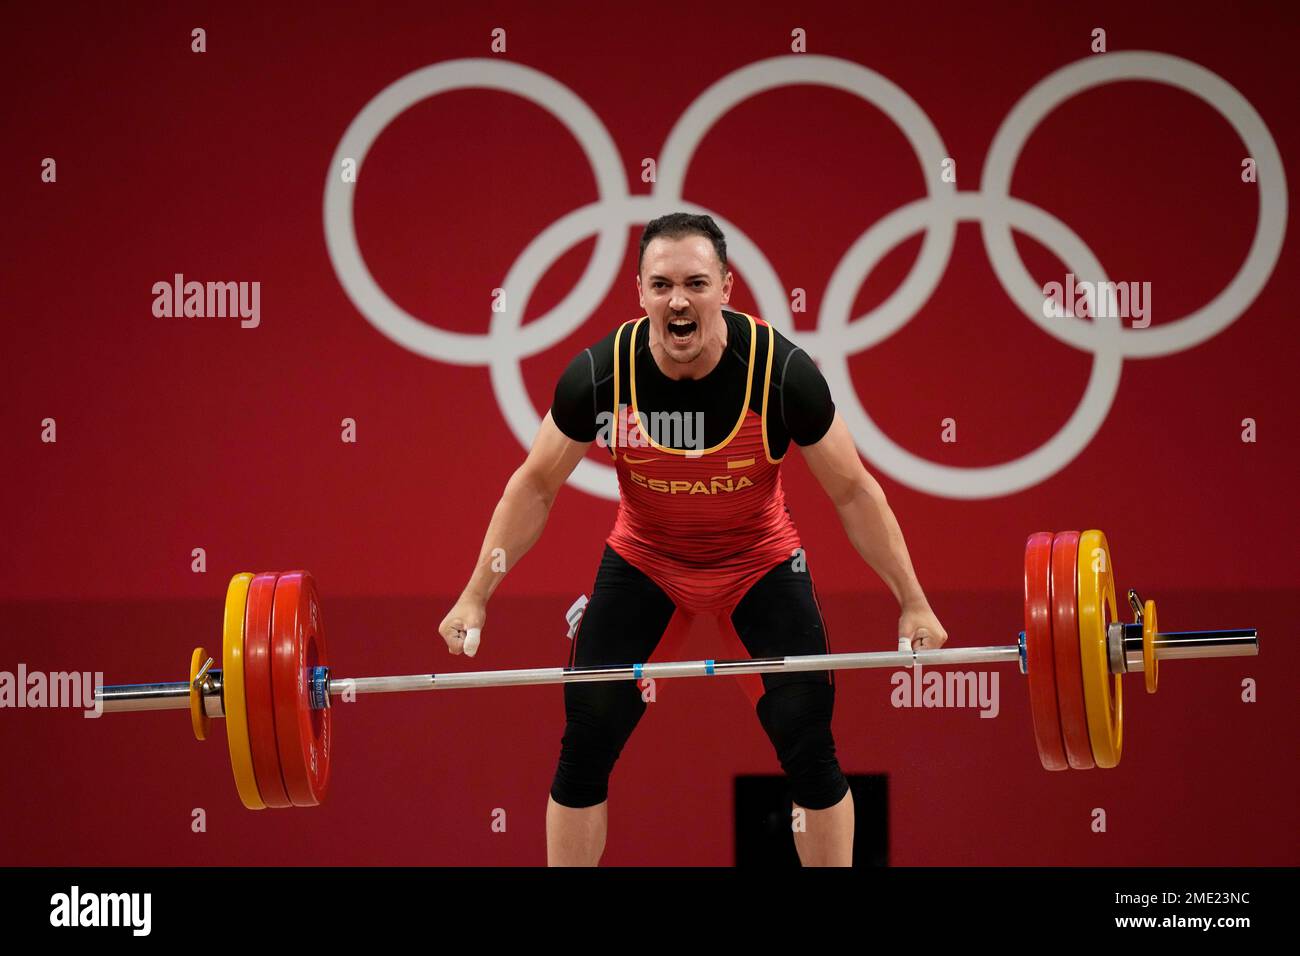 Andreas Eduardo Mata Perez of Spain competes in the men's 81kg  weightlifting event, at the 2020 Summer Olympics, Saturday, July 31, 2021,  in Tokyo, Japan. (AP Photo/Luca Bruno Stock Photo - Alamy